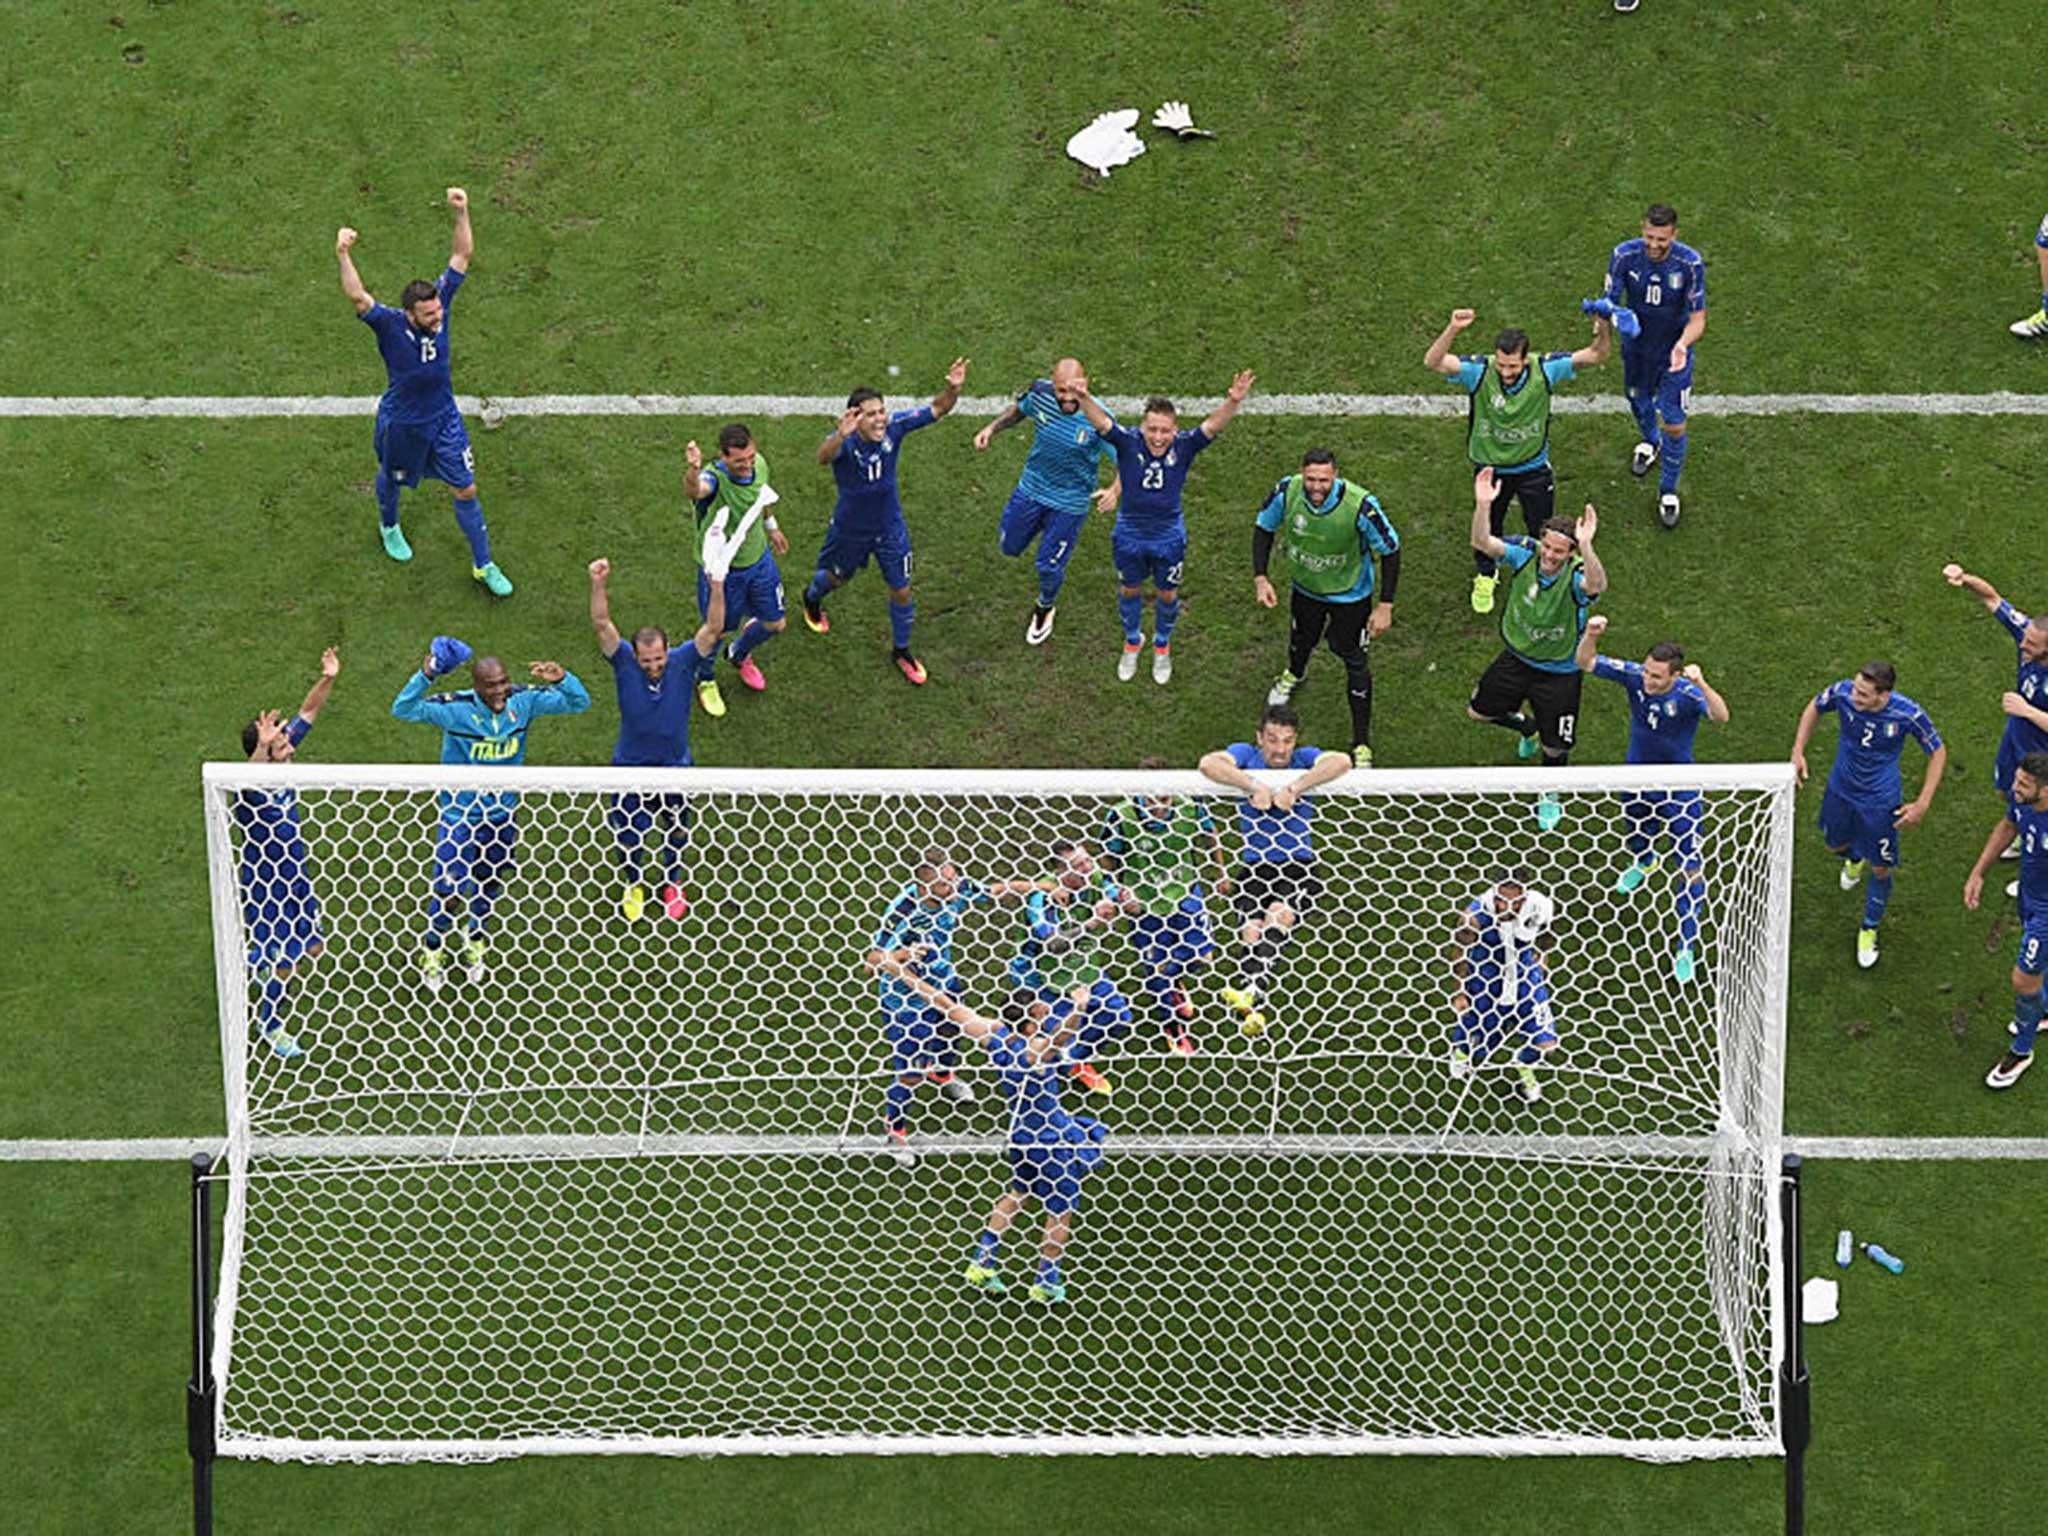 The Italians celebrate in front of their supporters